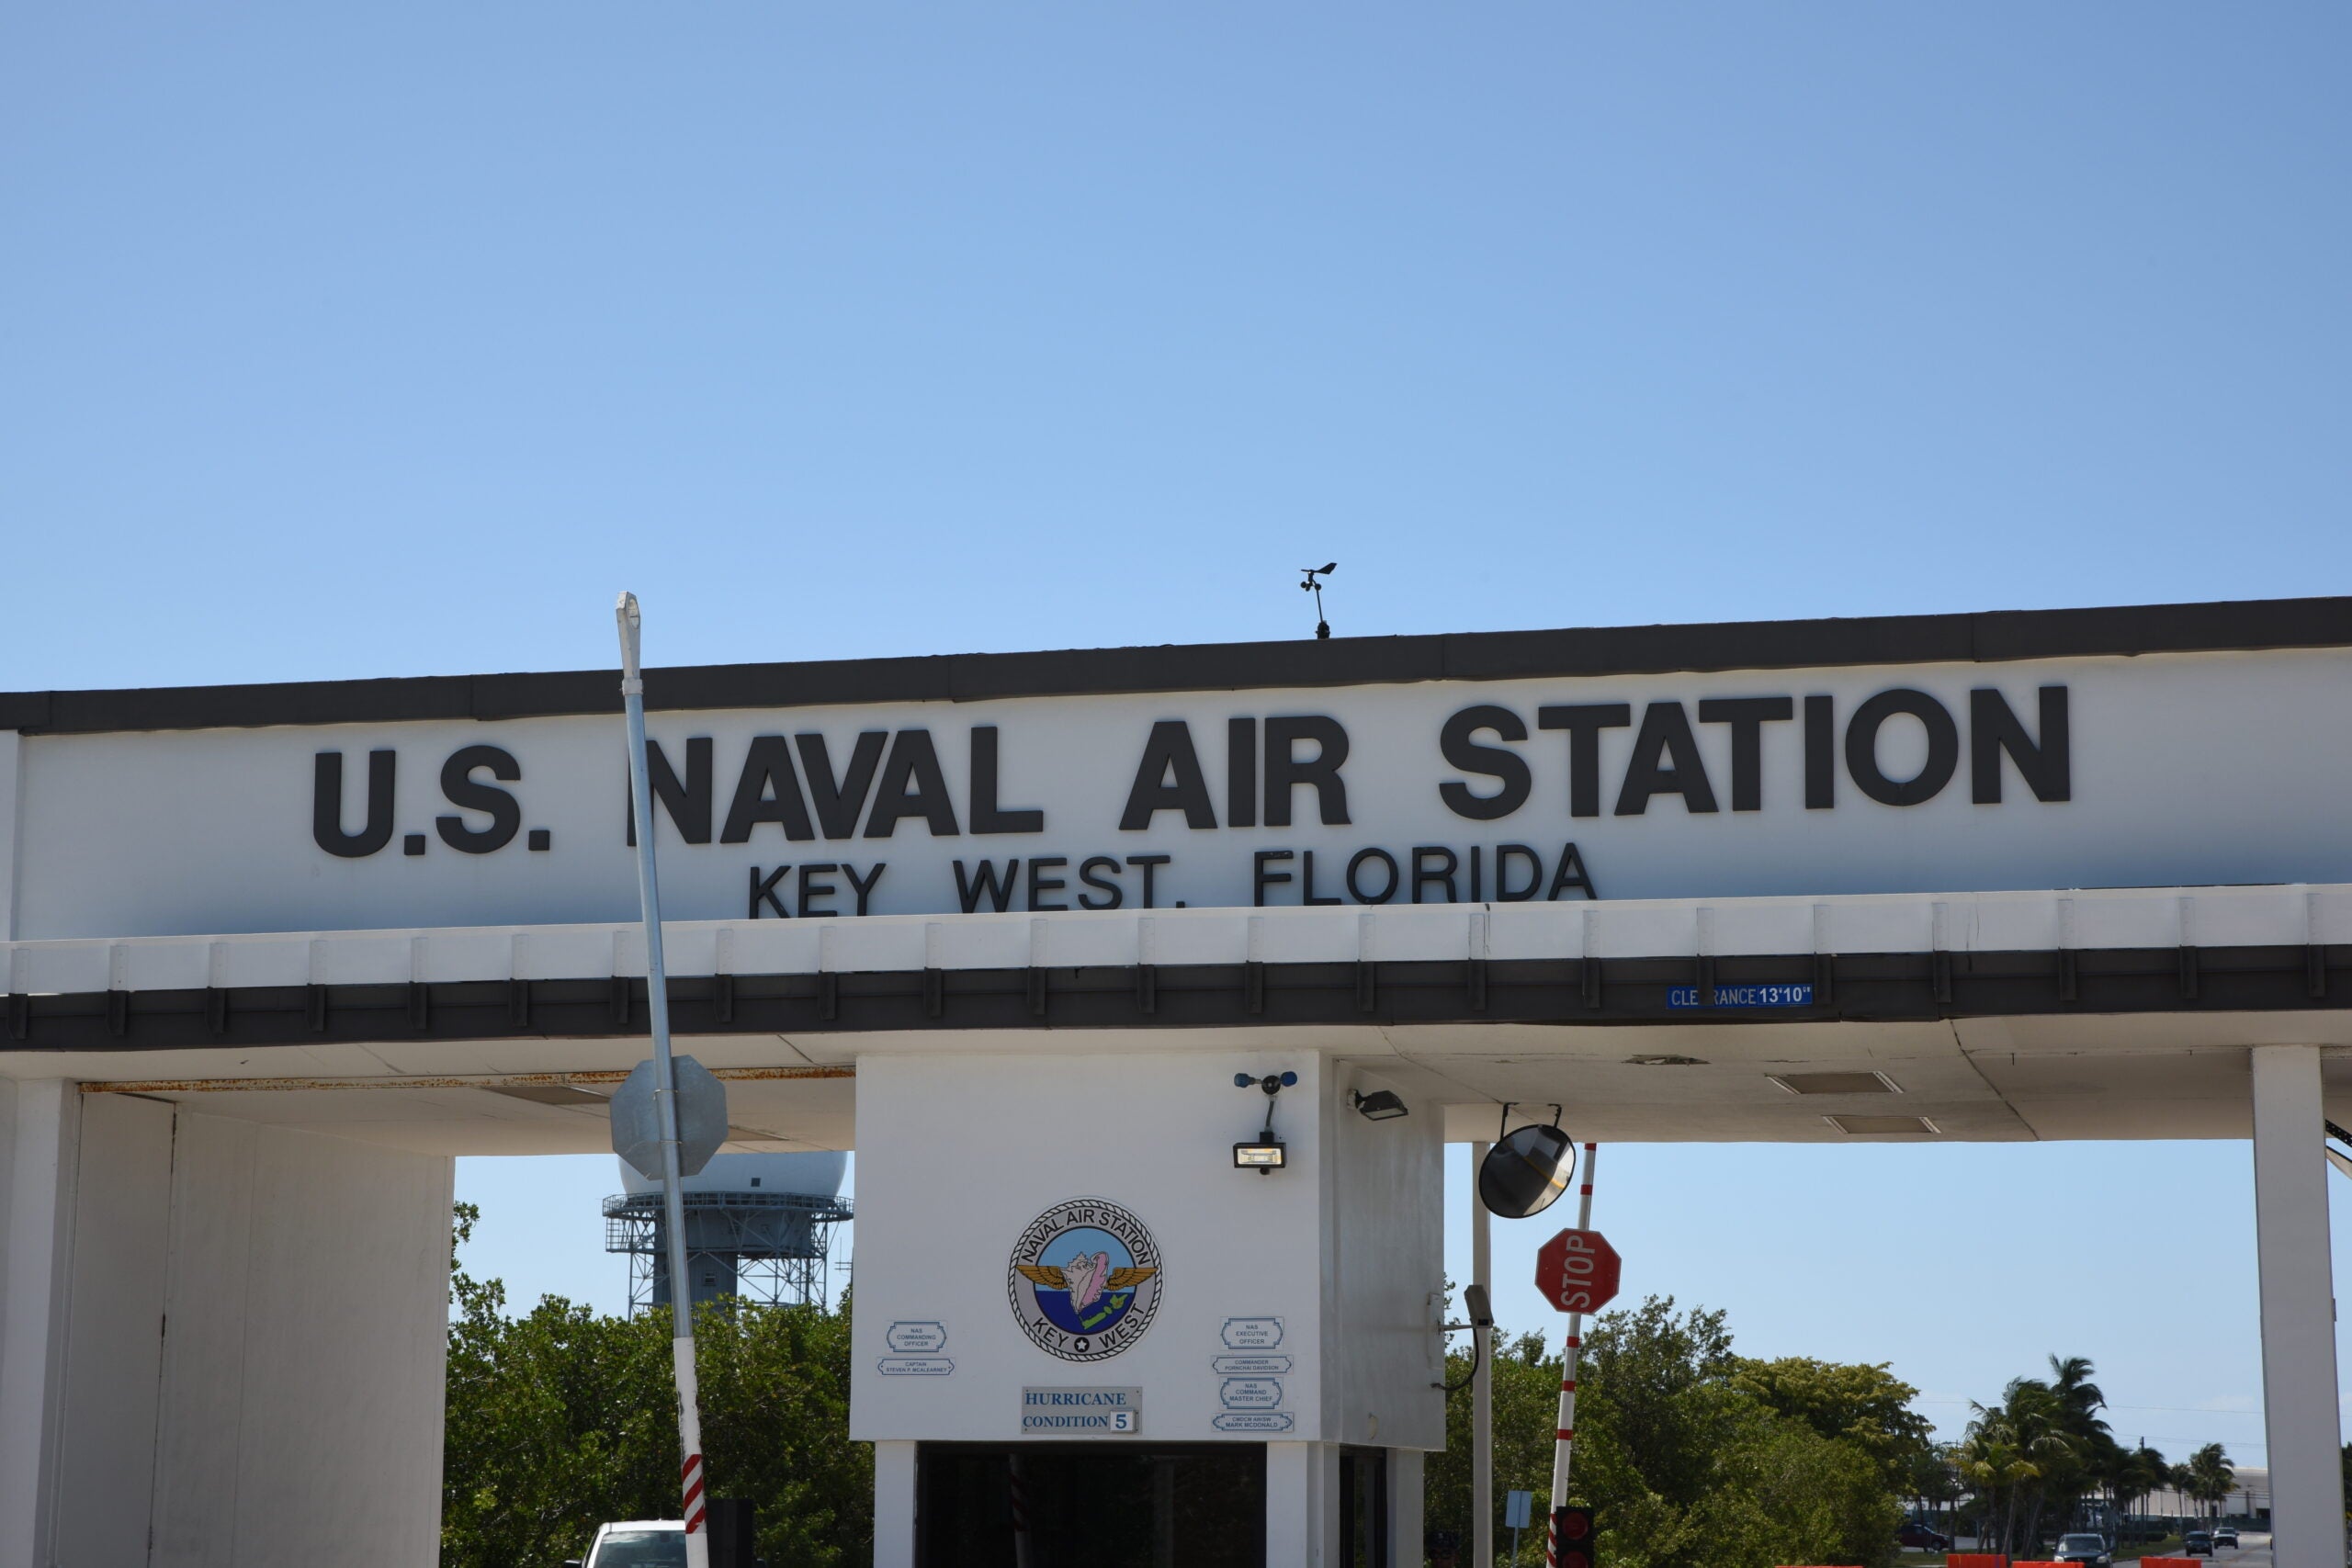 160418-N-SX614-001

Photo of Naval Air Station Key West’s sign. Key West is a state-of-the-art facility for air-to-air combat fighter aircraft of all military services and provides world-class pierside support to U.S. and foreign naval vessels.. (U.S. Navy Photo by Mass Communication Specialist 3rd Class Cody R. Babin/Released)